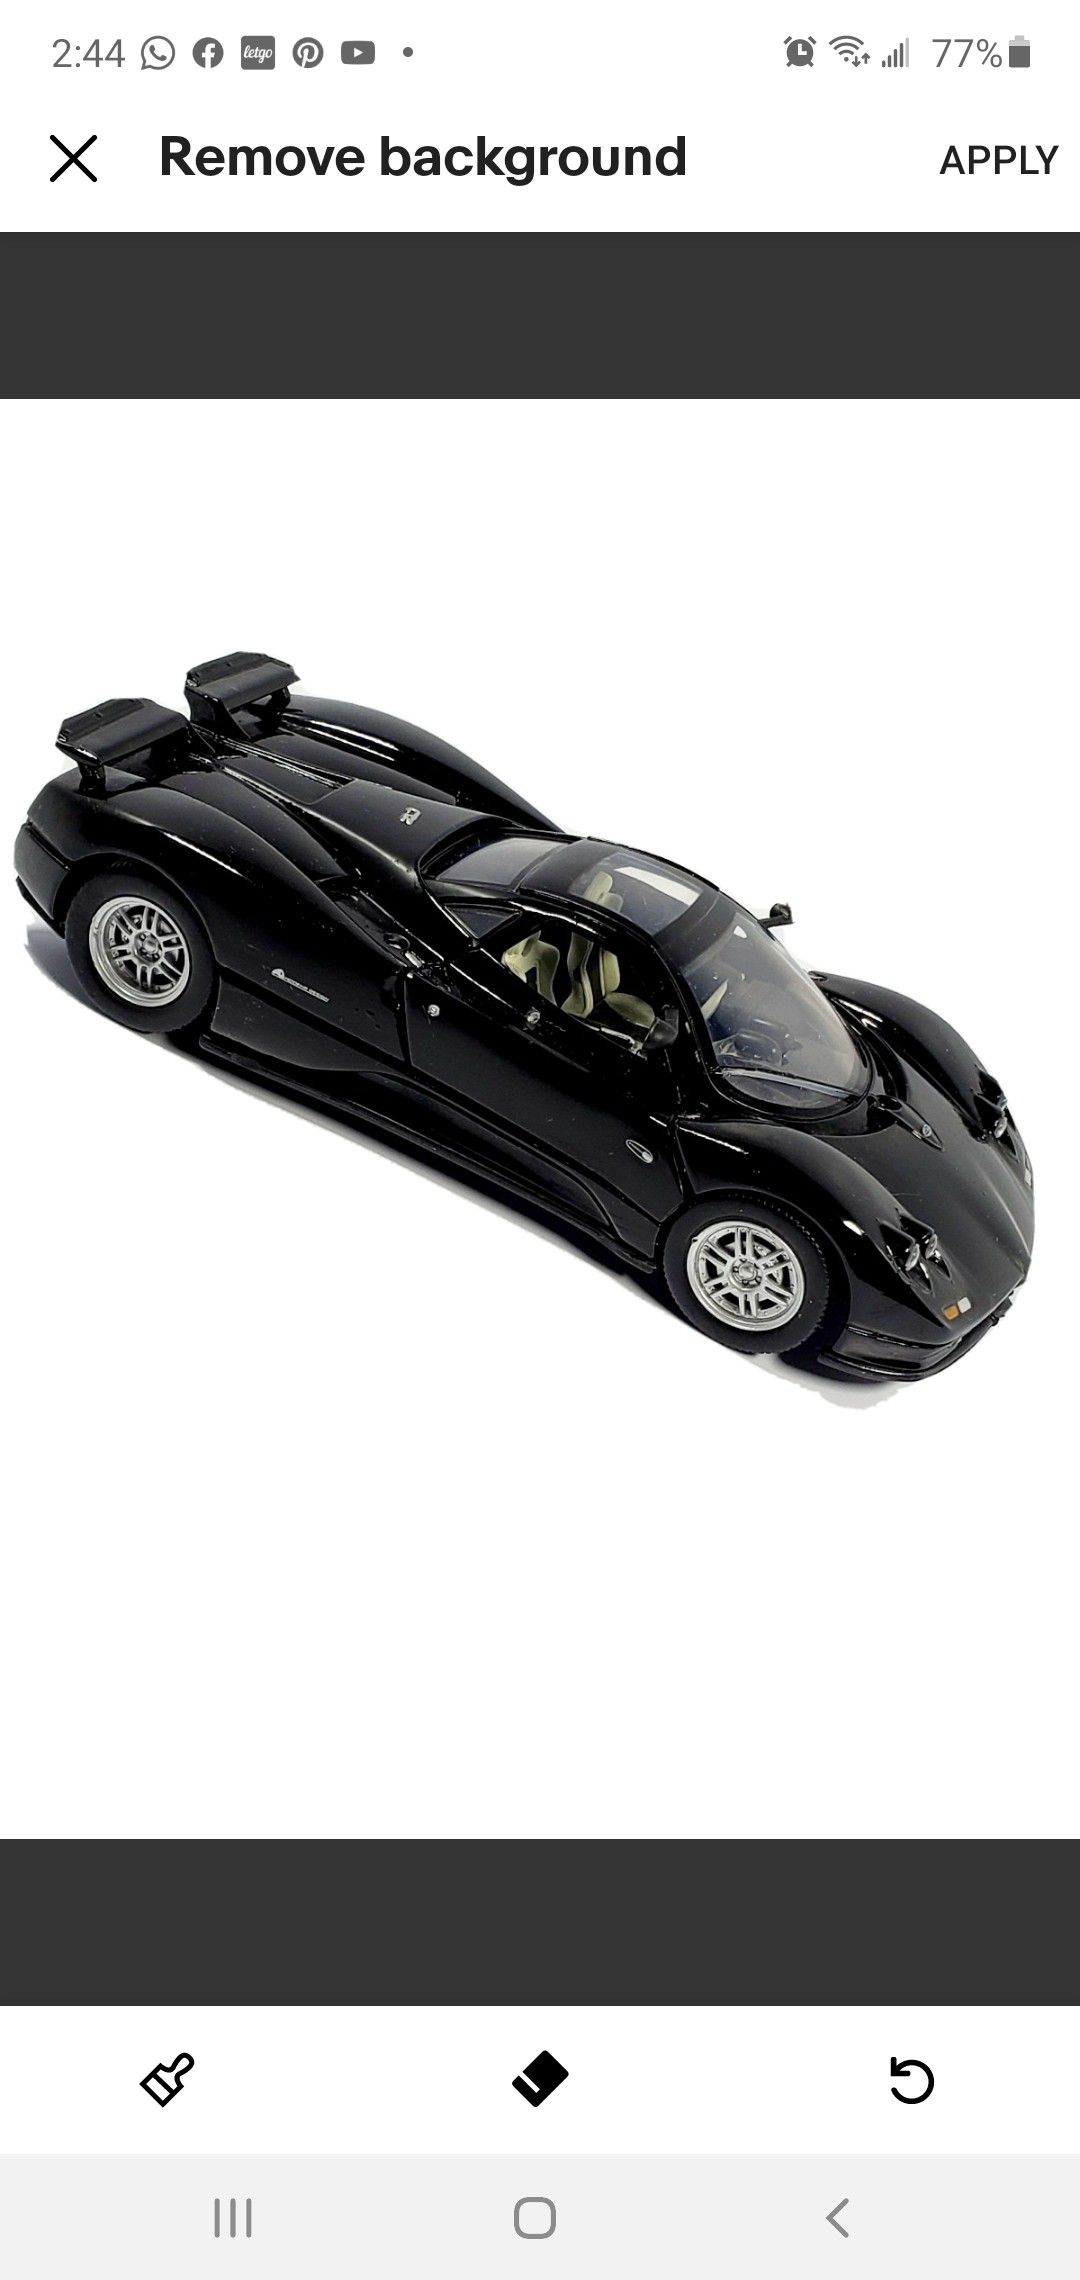 New Pagani Zonda C12, Black 1/24 Scale Diecast Model Toy Car Collectible. Free Shipping South Florida